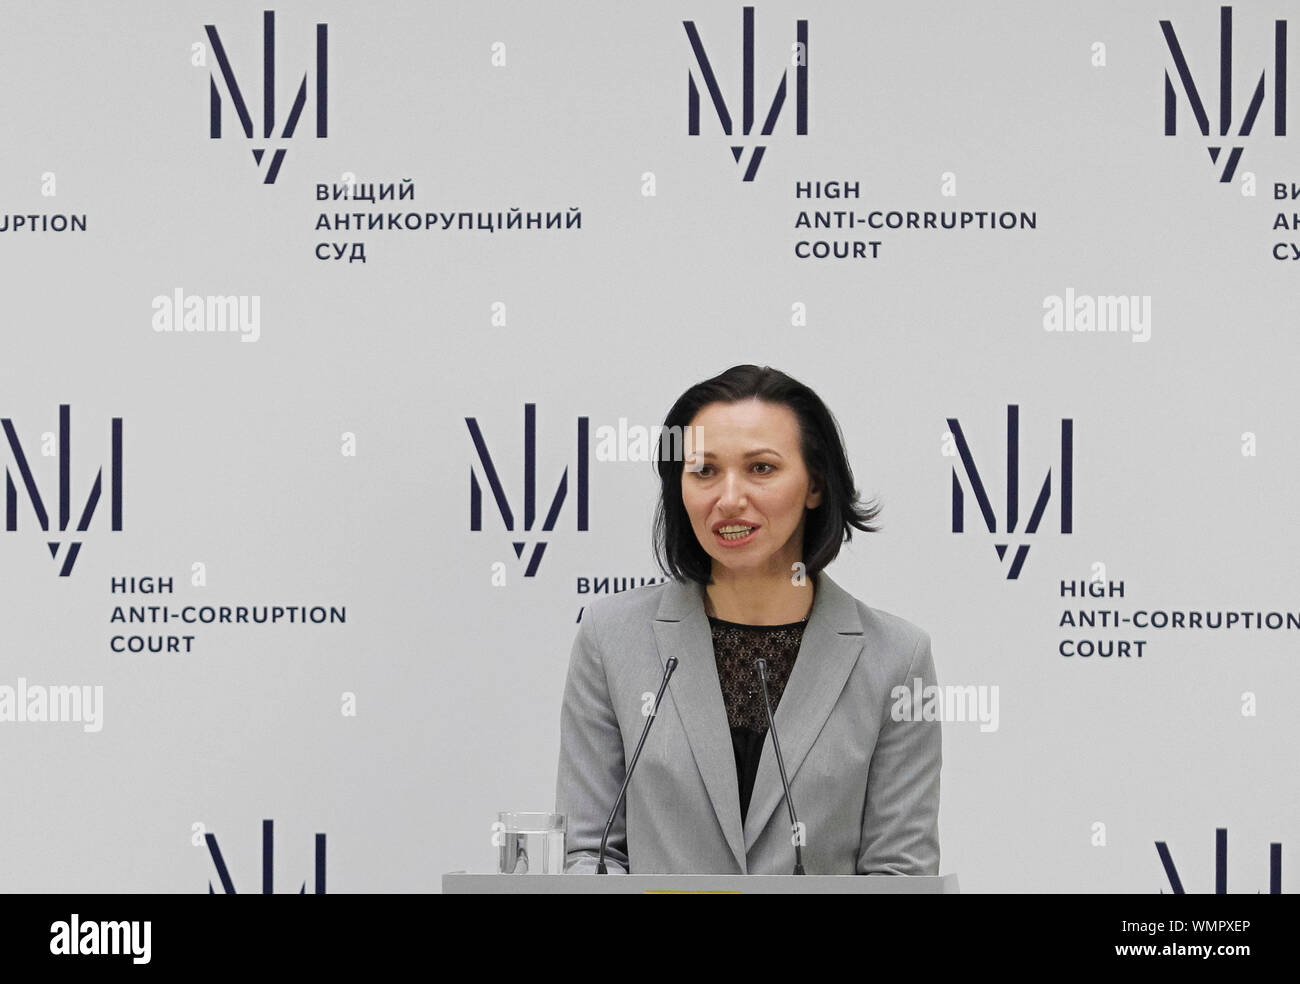 Judge Olena Tanasevych speaks during the launch of the High Anti-Corruption court in Kiev, Ukraine. Stock Photo